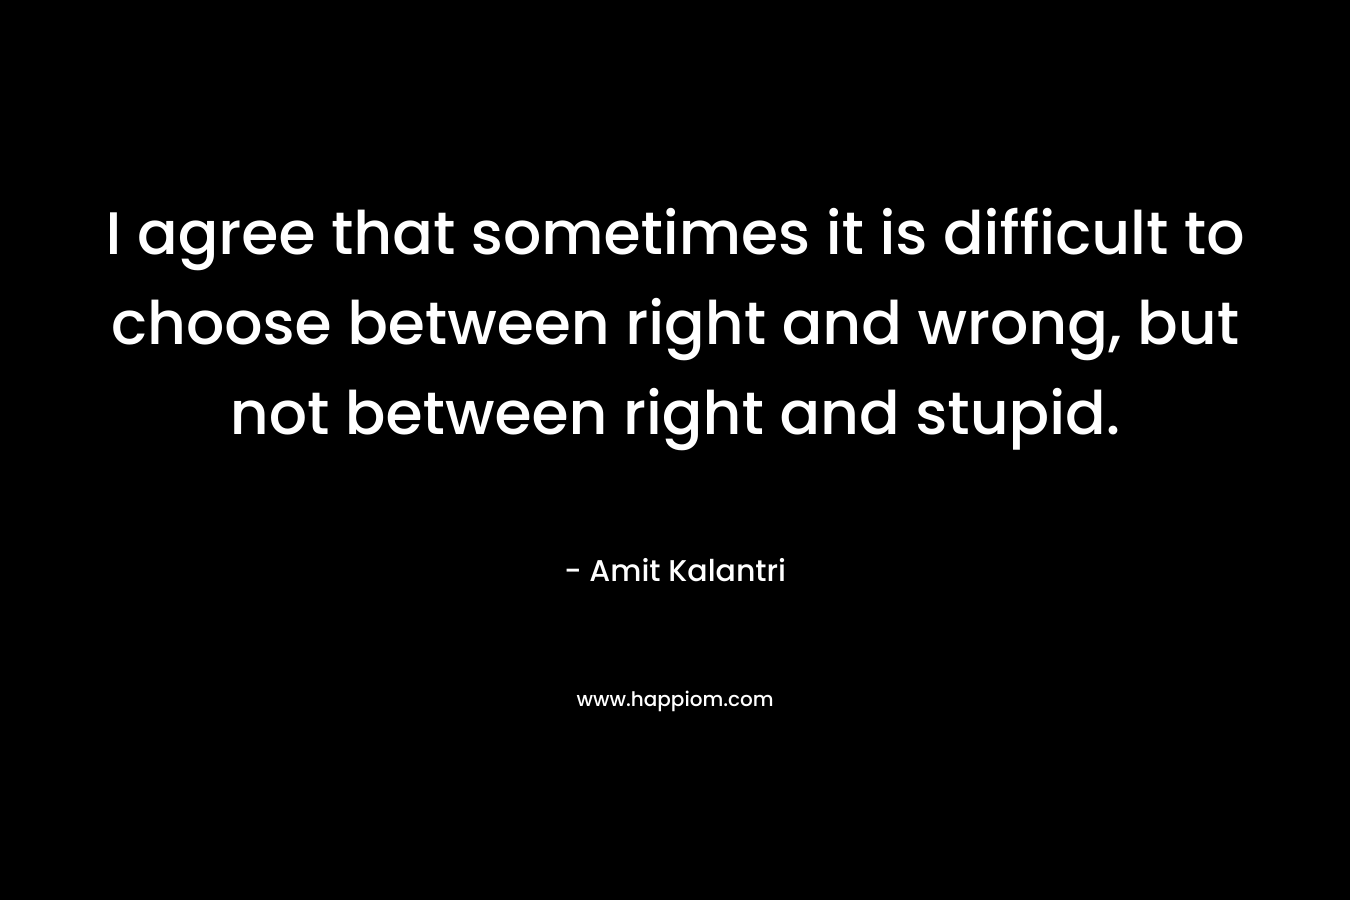 I agree that sometimes it is difficult to choose between right and wrong, but not between right and stupid.